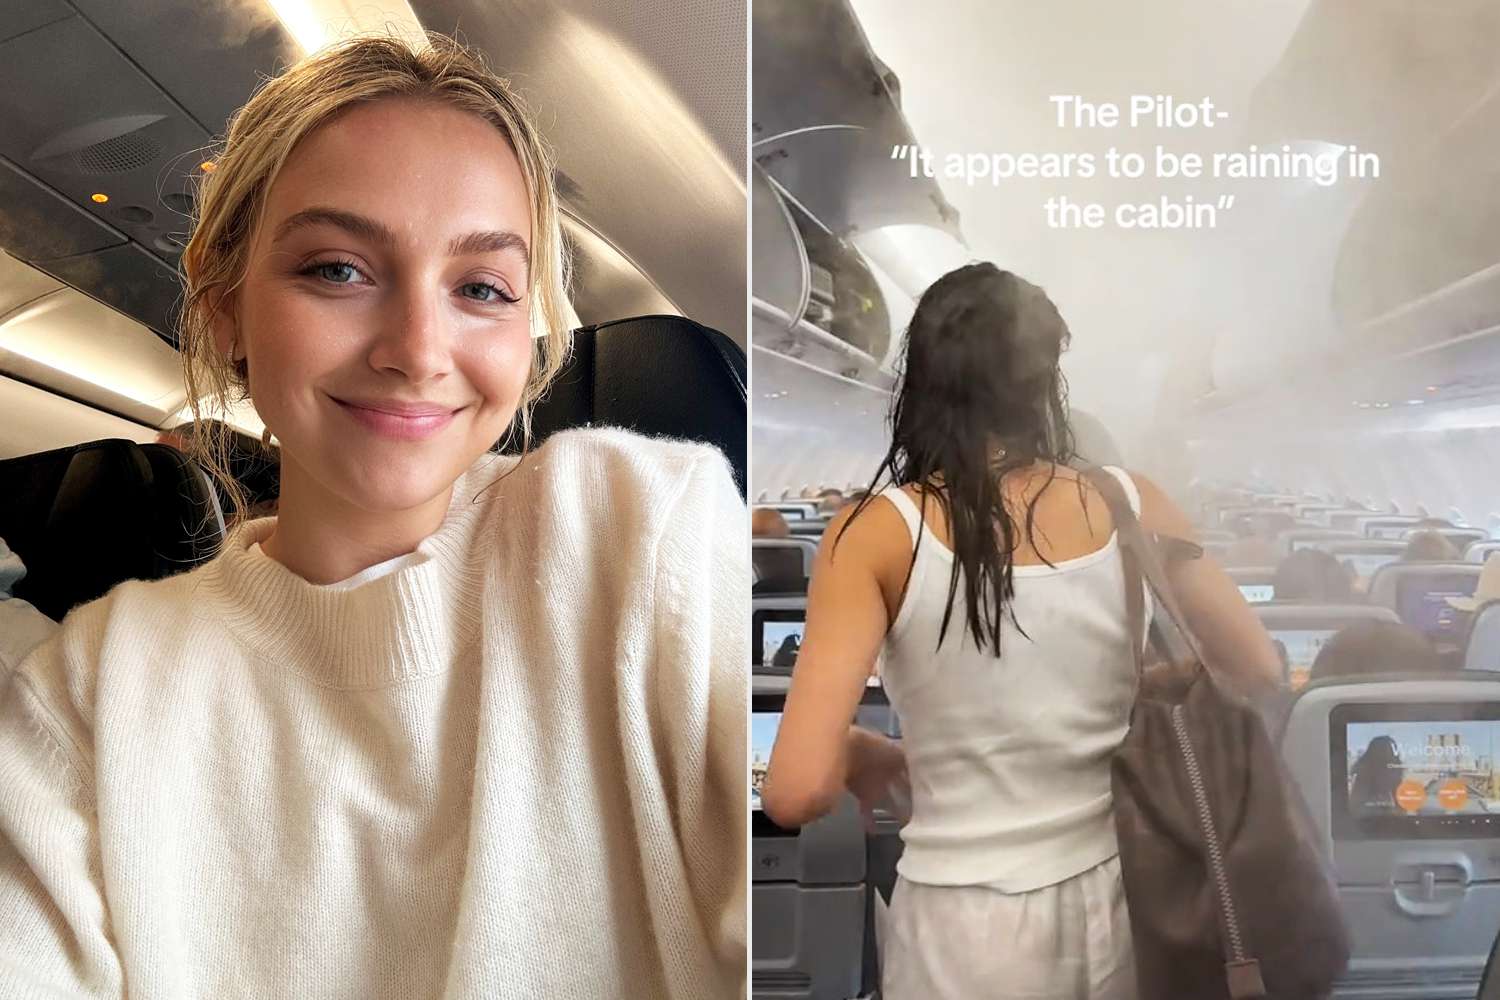 JetBlue Passenger Films Rain-Like Mist Inside Plane Cabin, Claims She Was 'Soaking Wet and Cold' During Flight